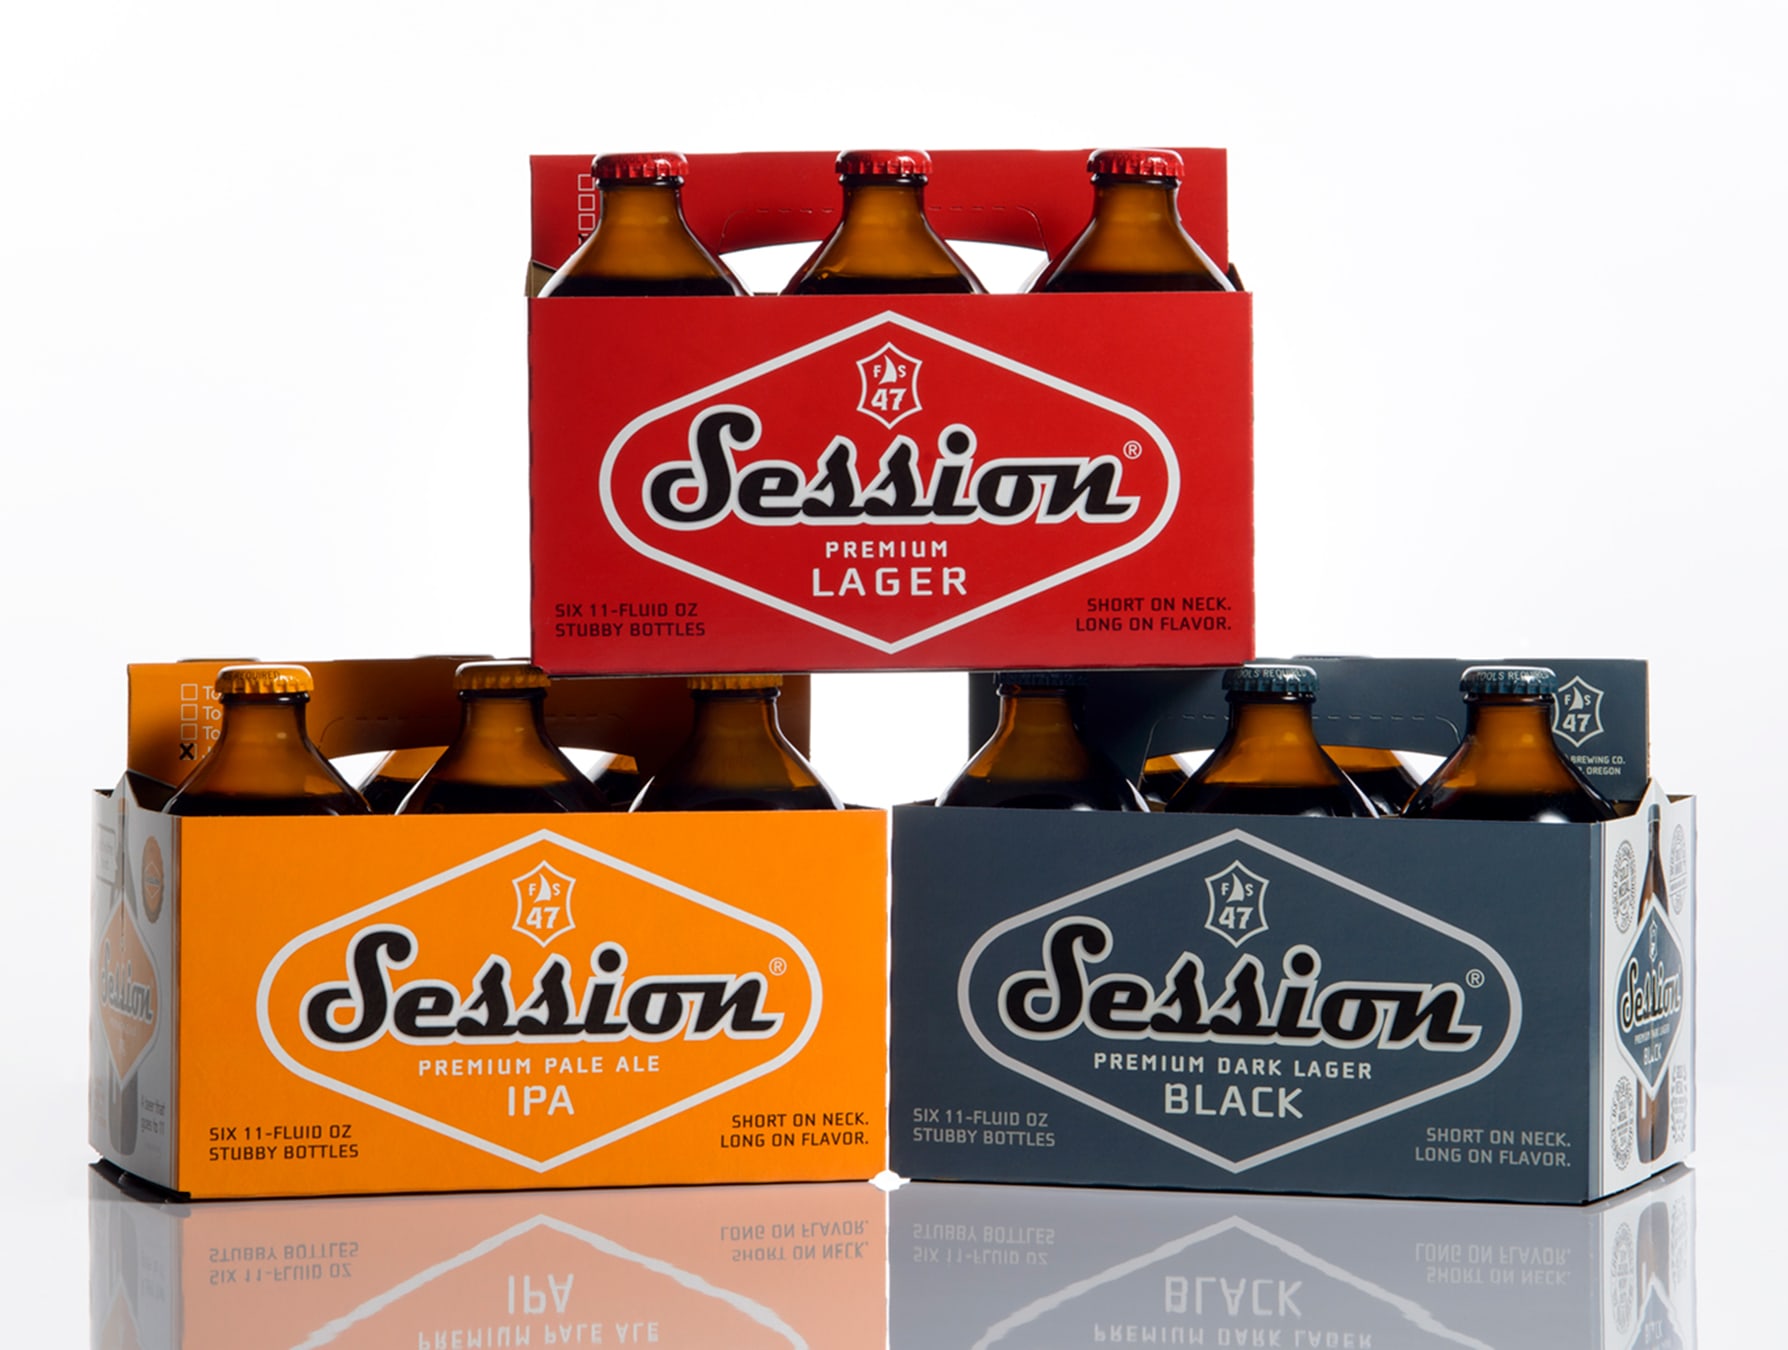 Session beer packaging design 6-pack family